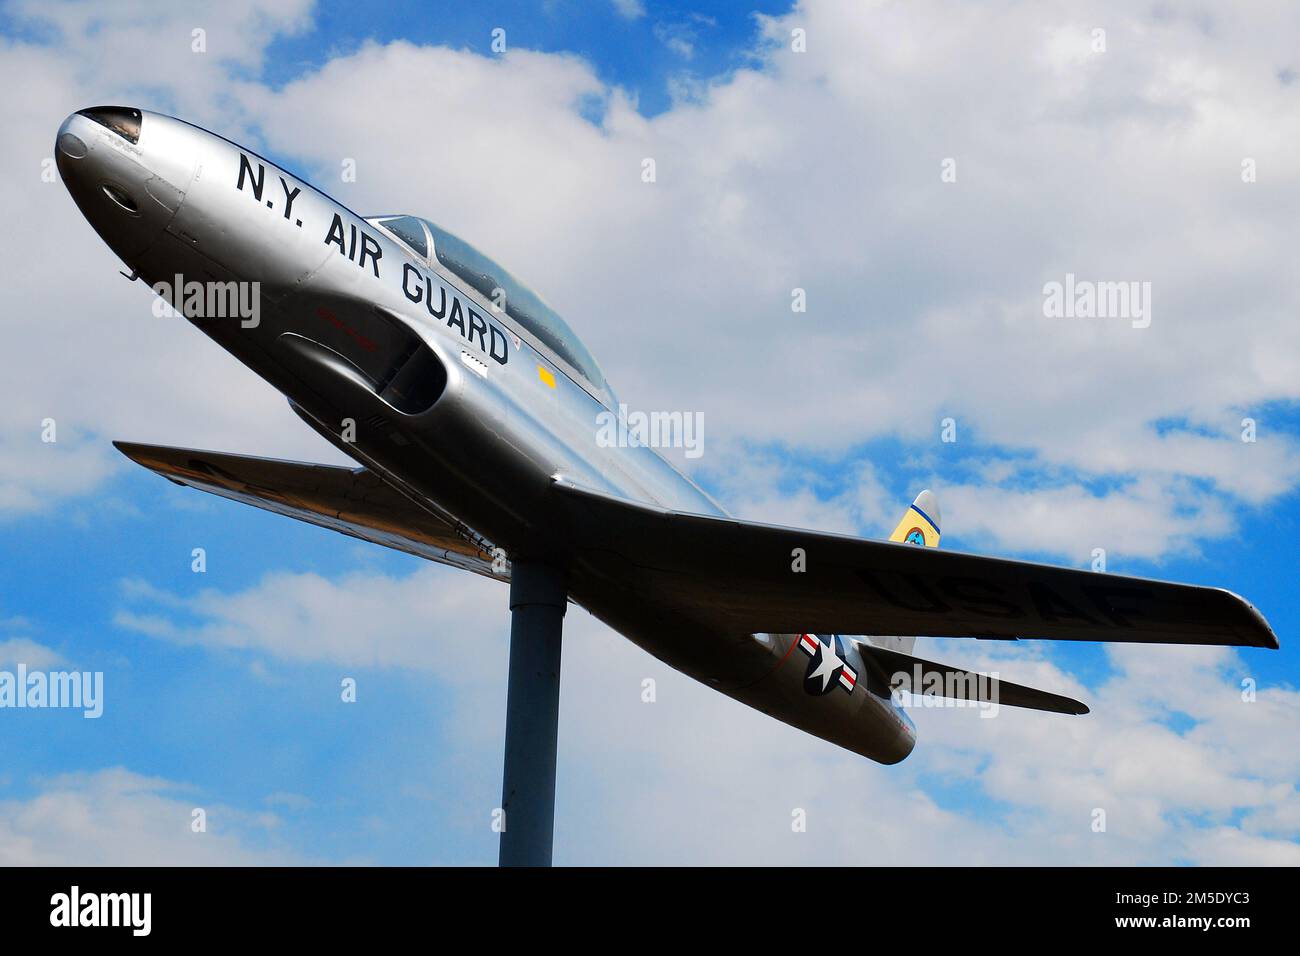 A Lockheed T33 jet fighter, also known as Plane on a Stick, stands at the entrance of the Westchester County Airport Stock Photo